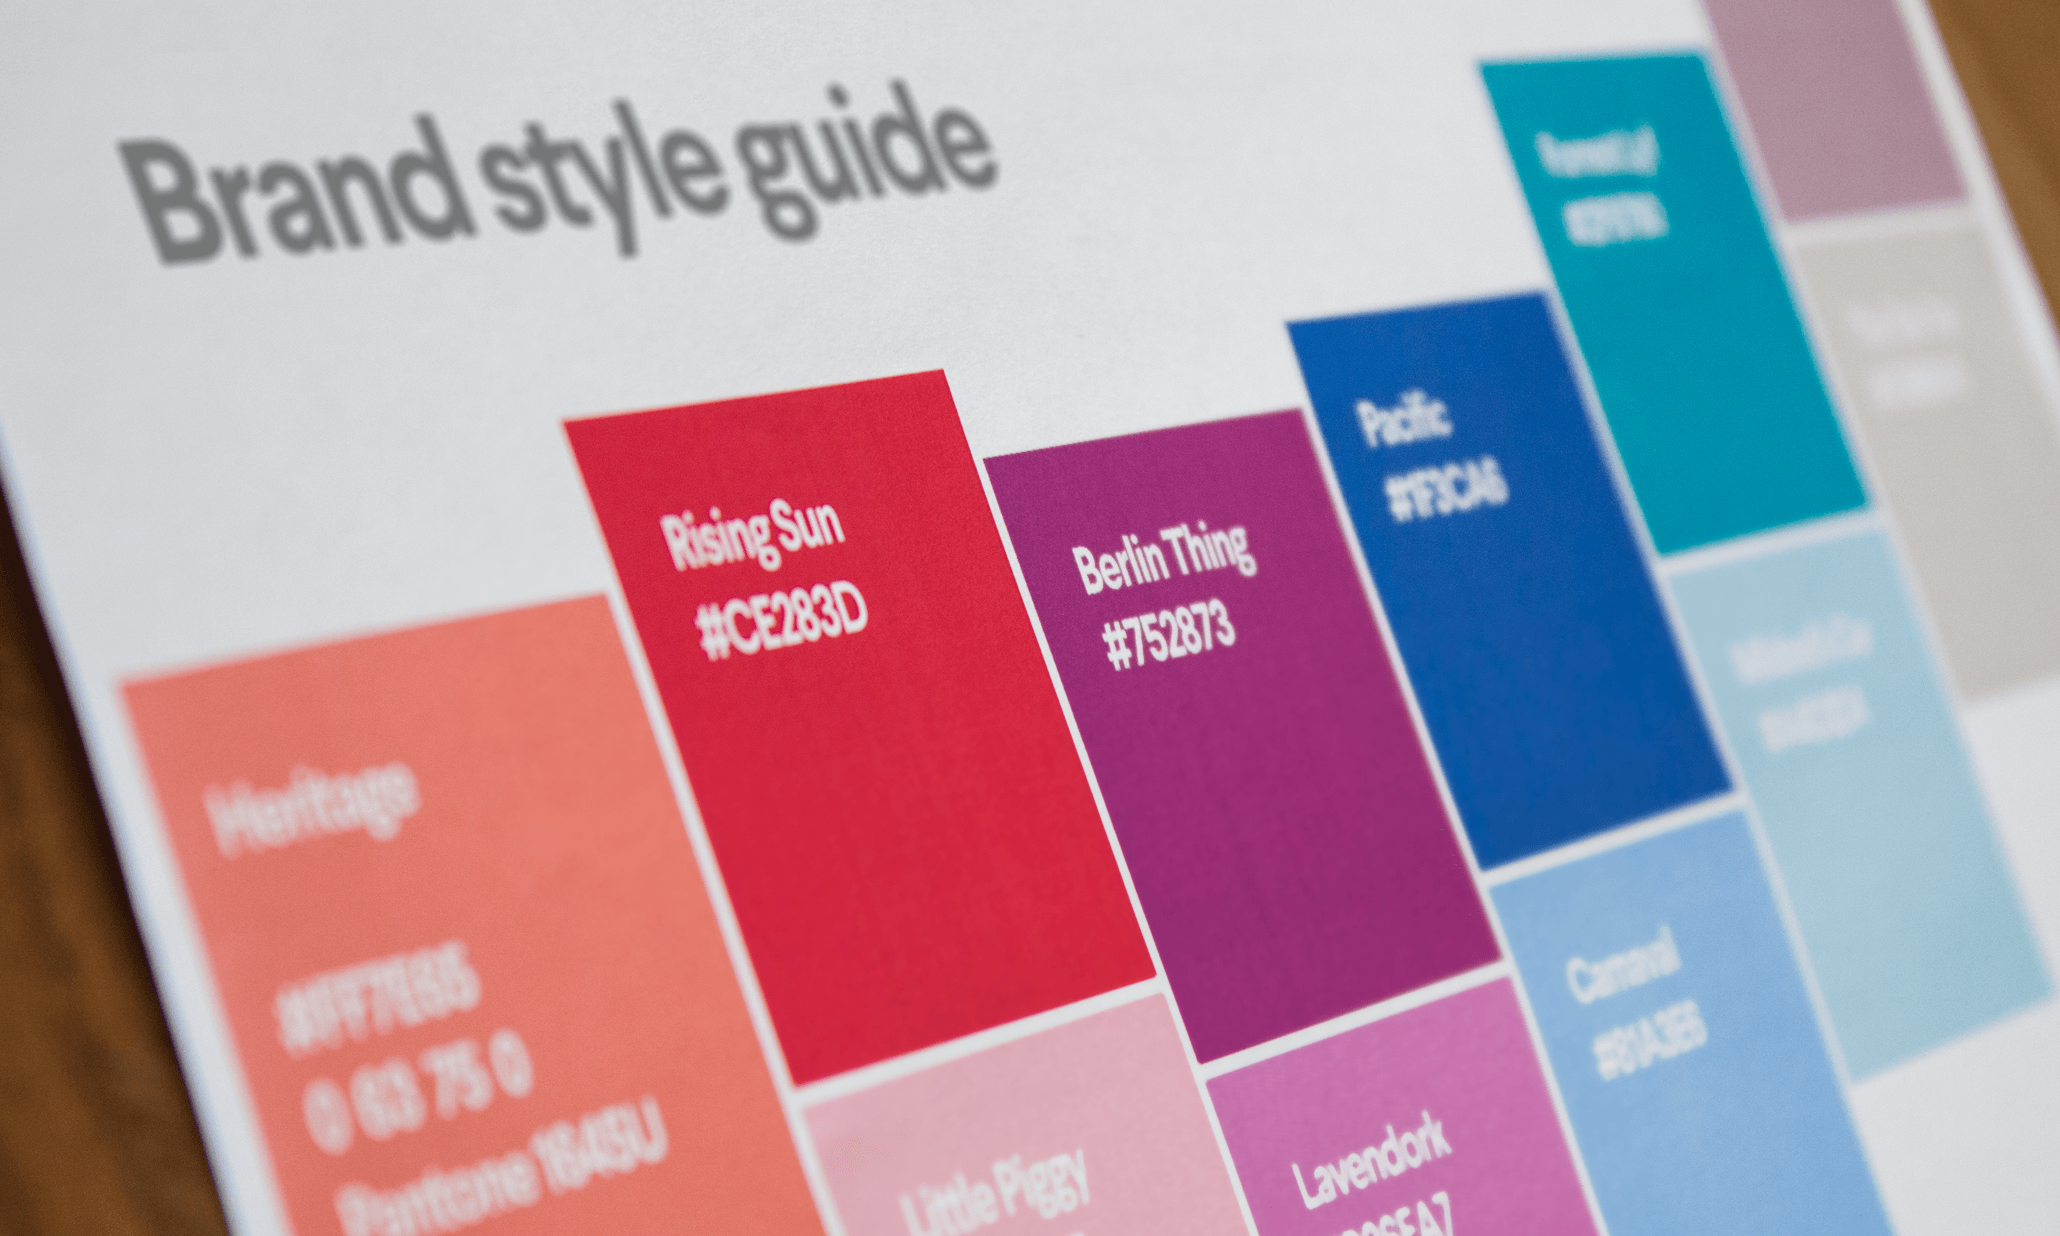 geweten motto Paar How to create a brand style guide - 99designs